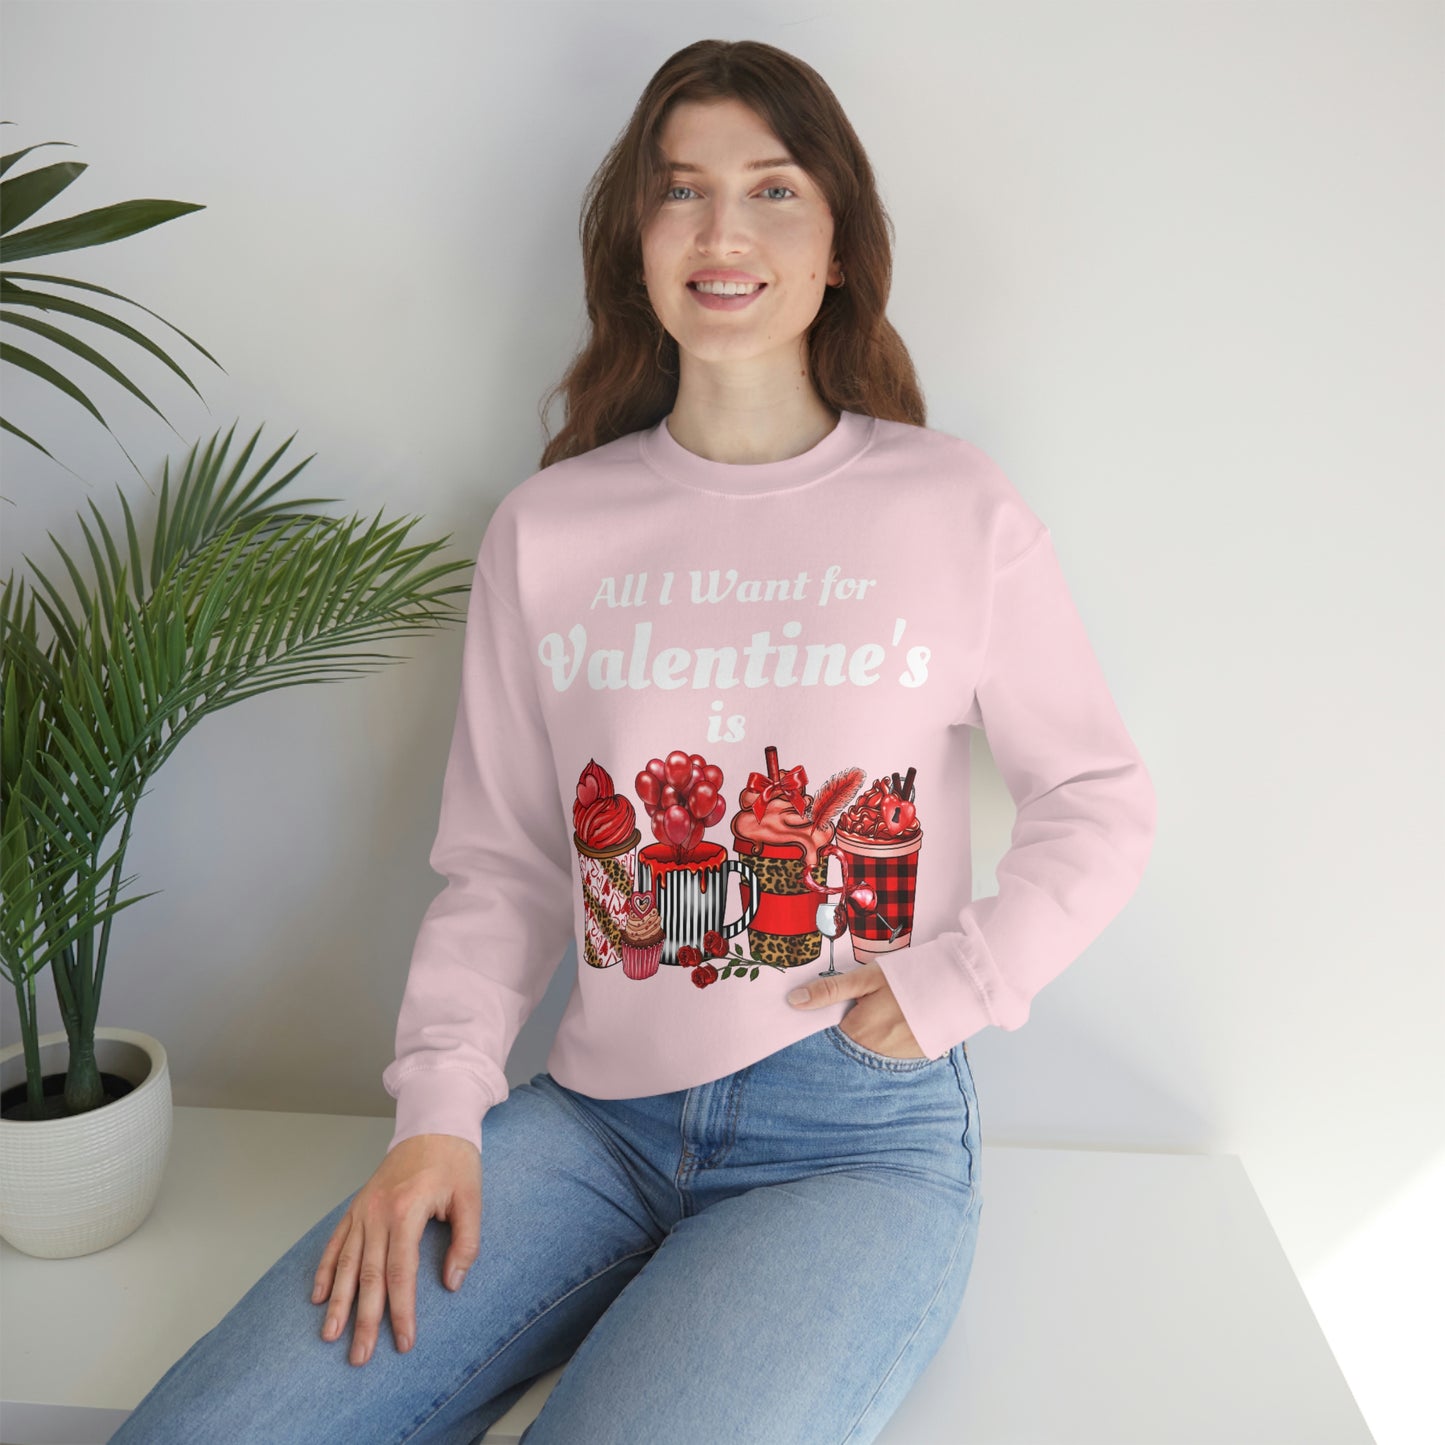 All I want for Valentines is Coffee Sweatshirt